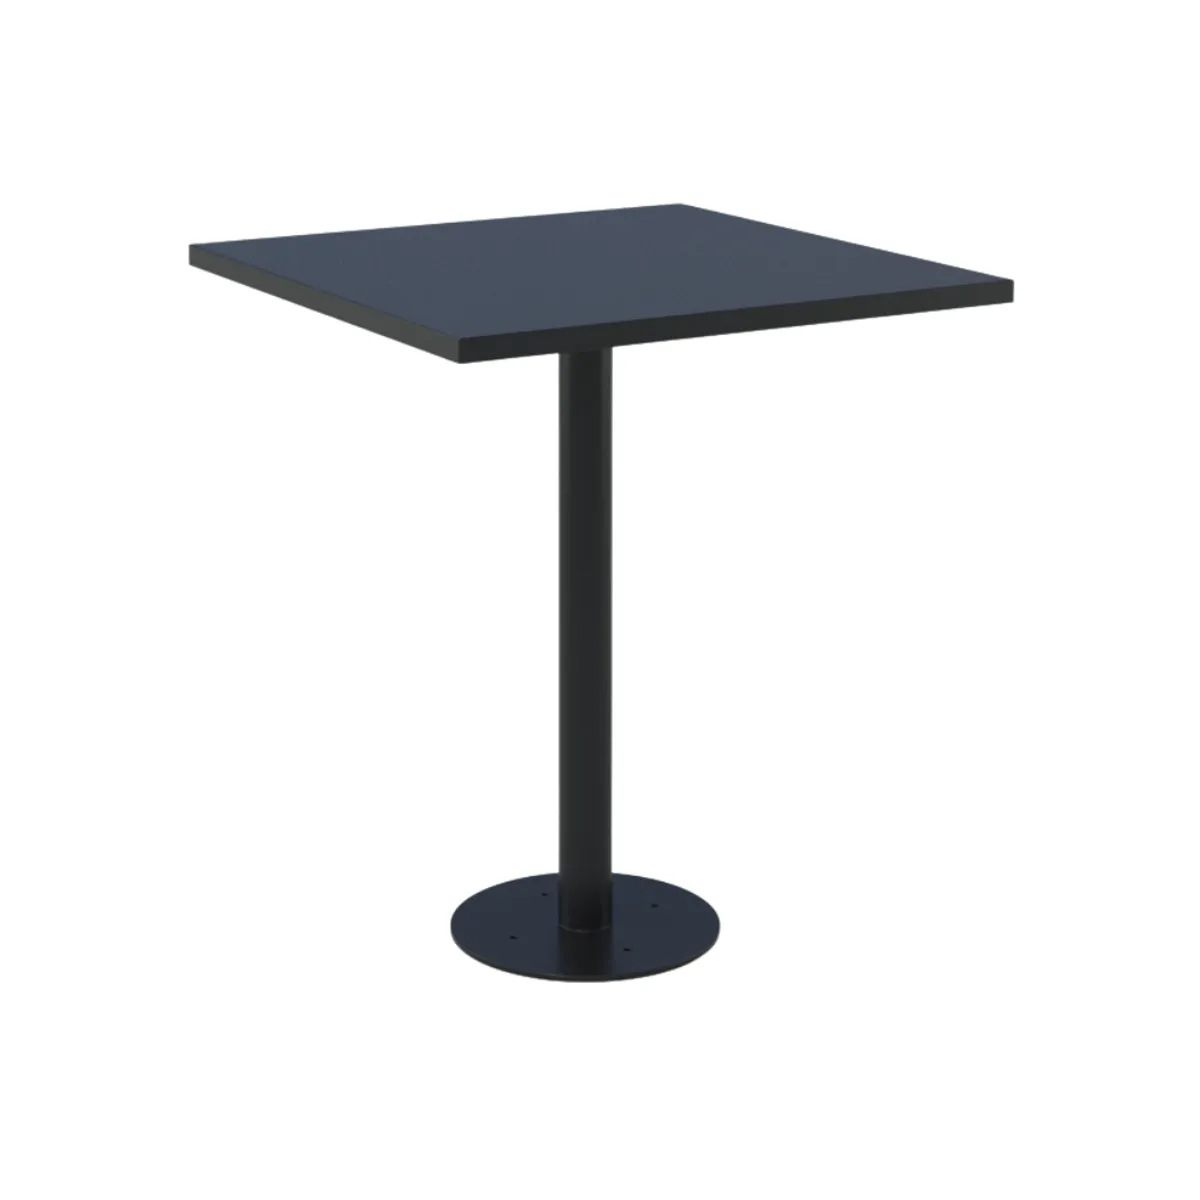 Bespoke Metropole outdoor square table 1